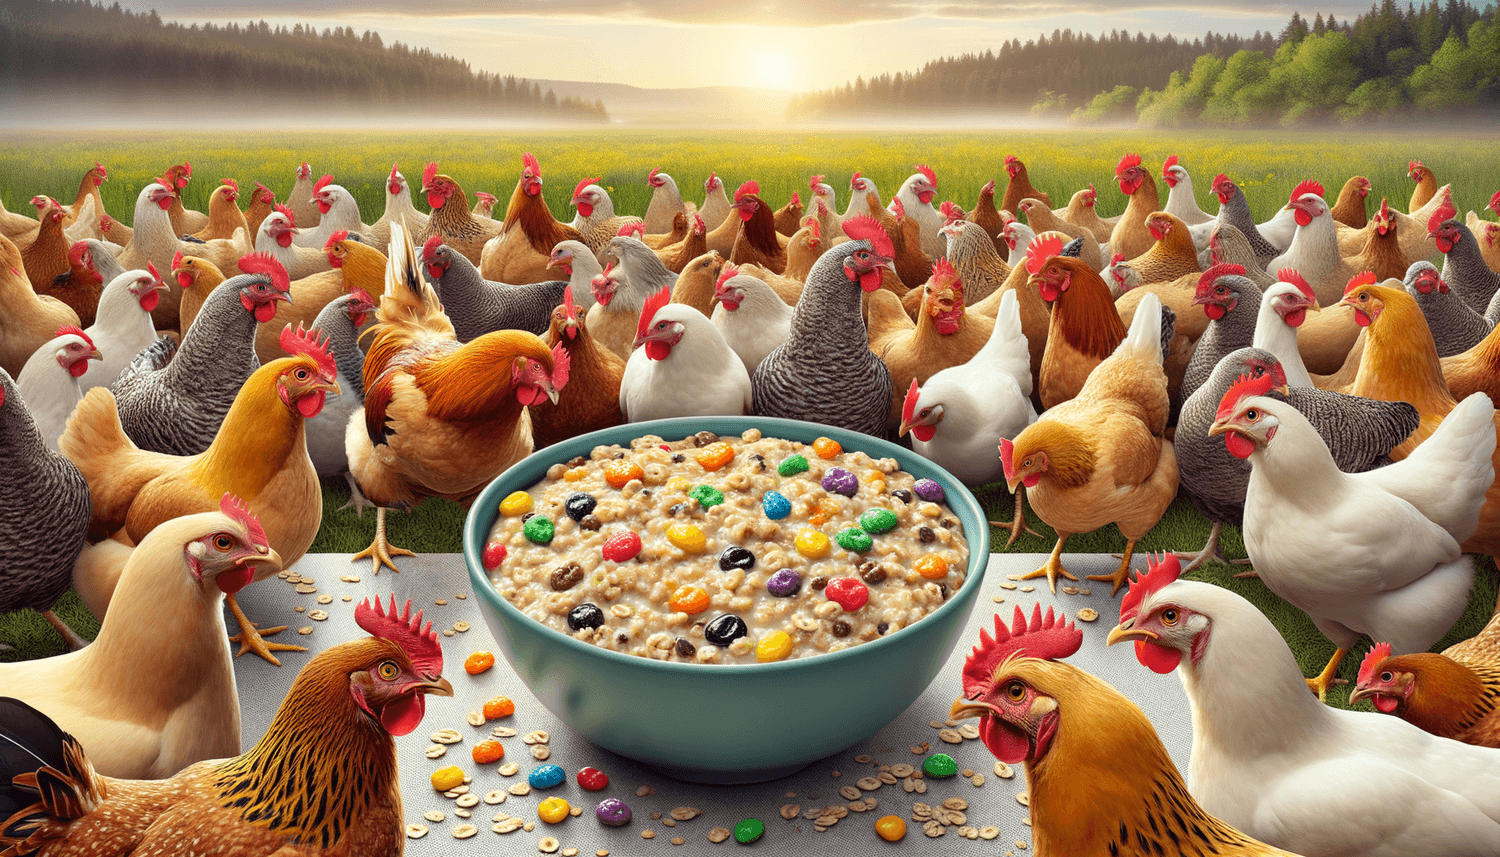 Can Chickens Eat Flavored Oatmeal?